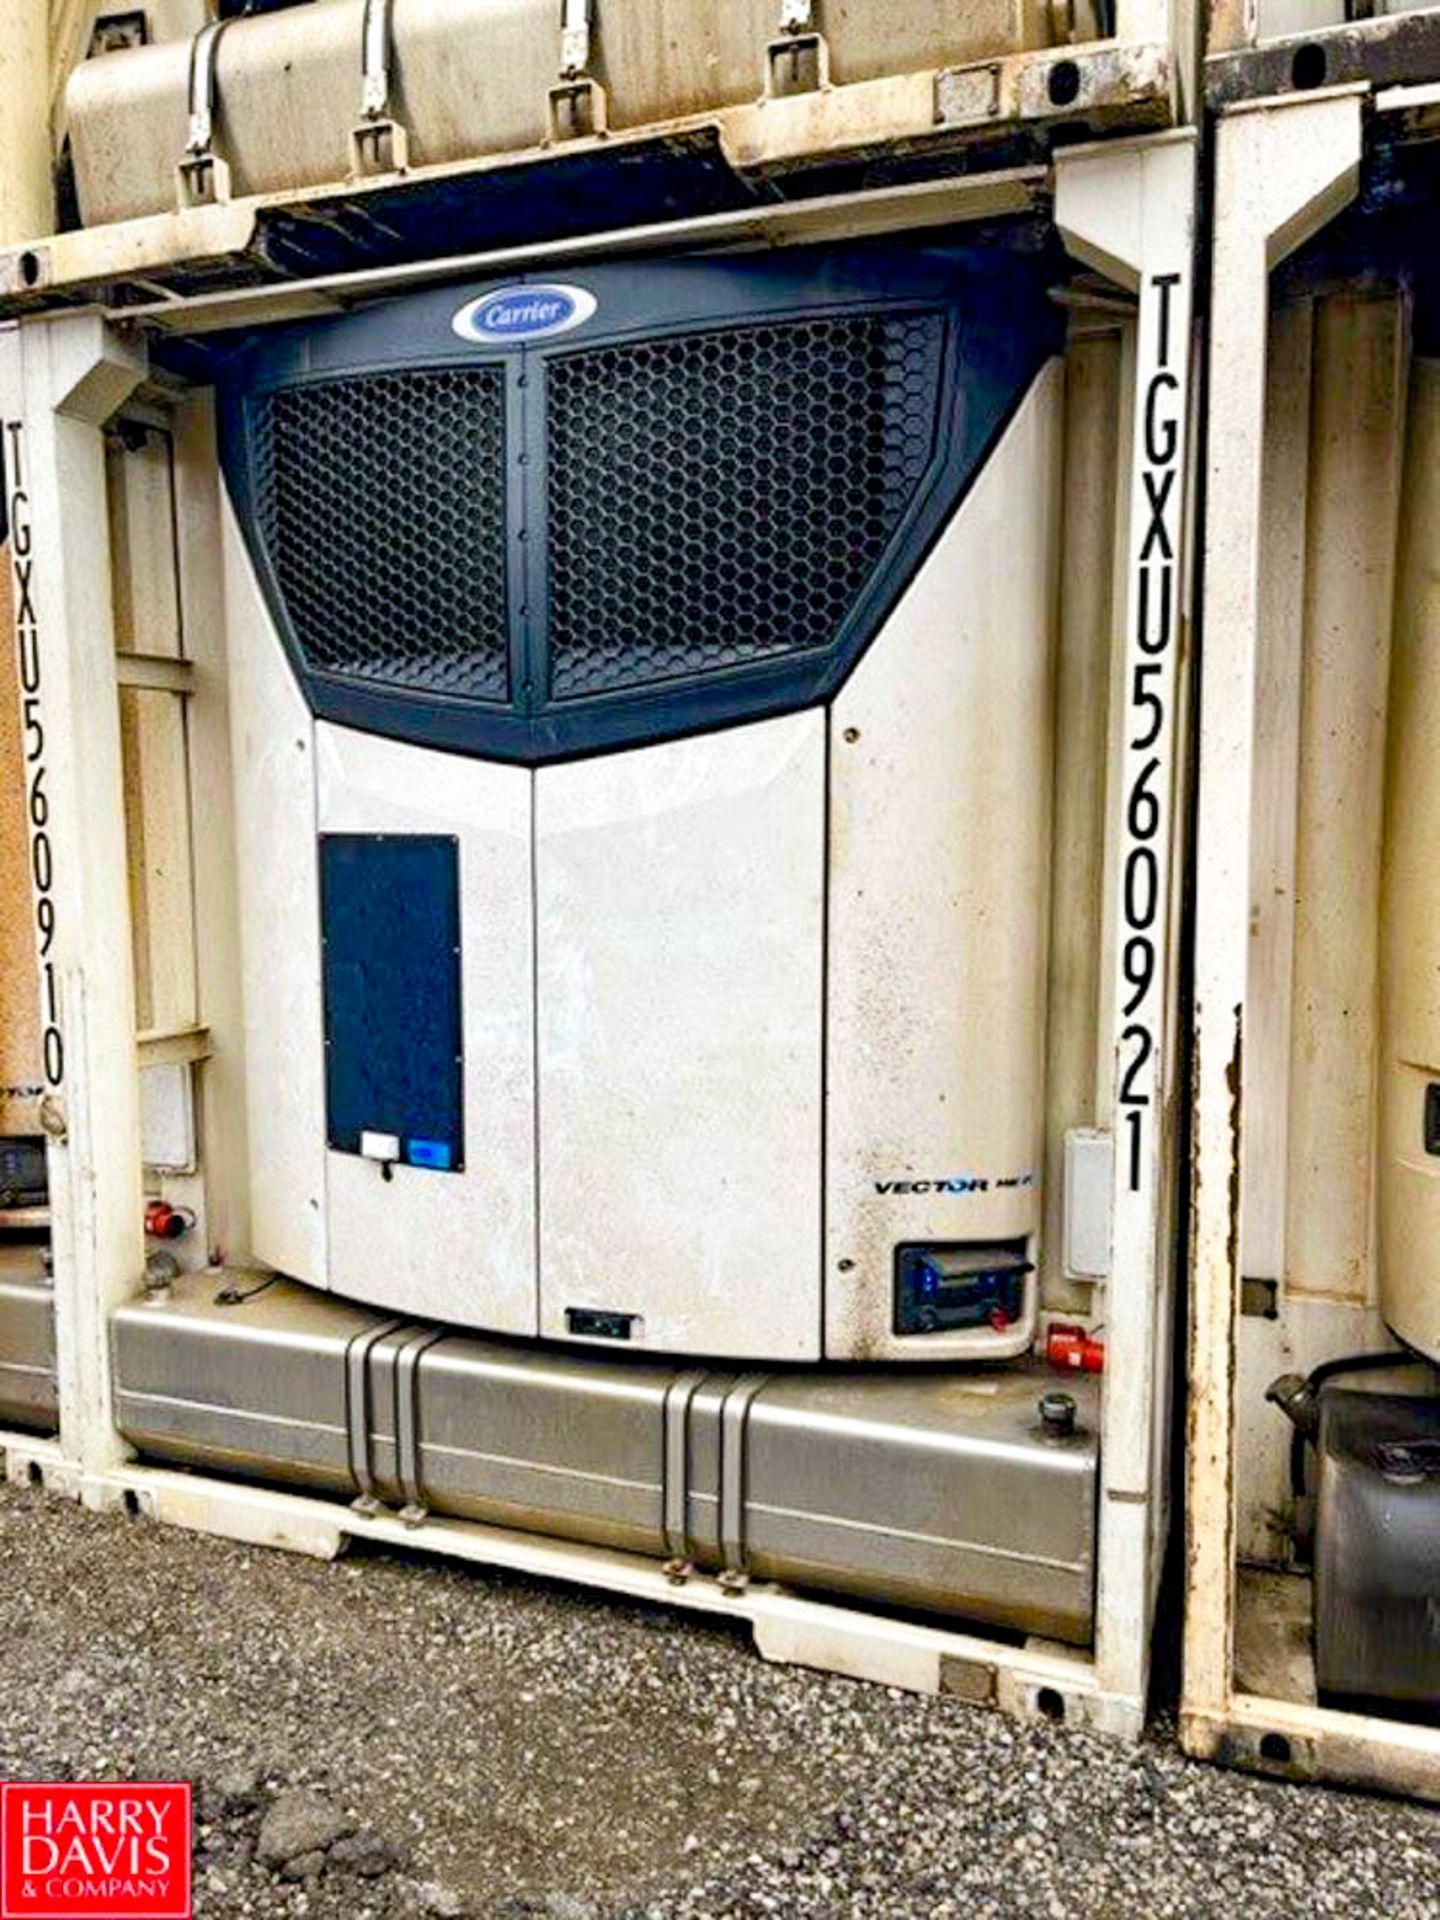 2021 Insulated, 53' CIMC Container with Carrier Vector HE19 Refrigeration Unit, Approximately 1,431 - Image 2 of 11